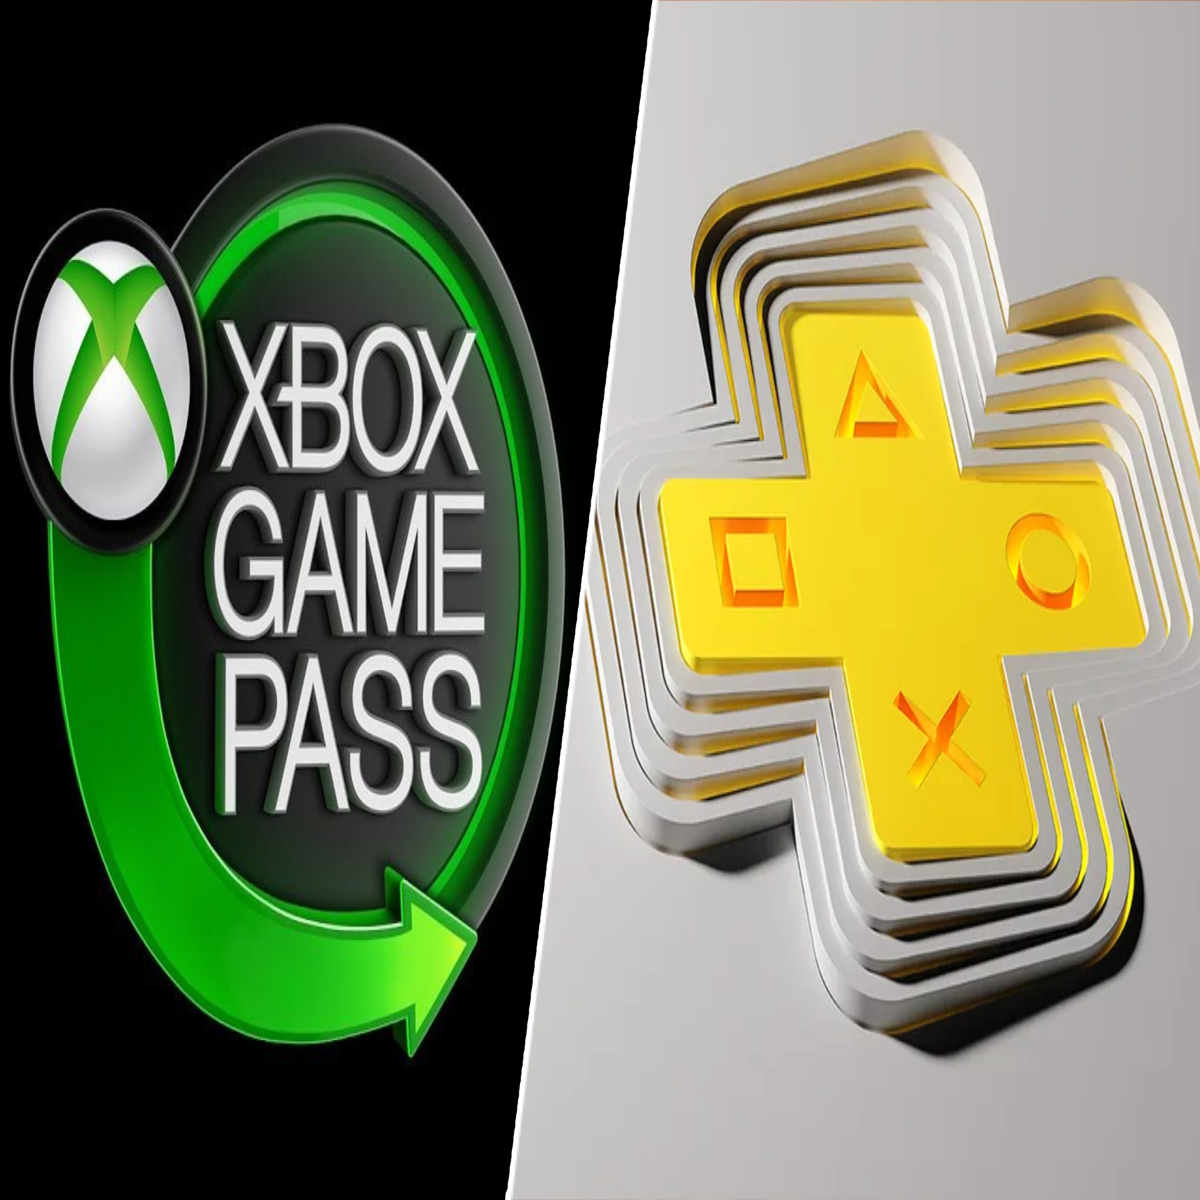 Sony takes aim at Xbox Game Pass with PlayStation Plus Video Pass